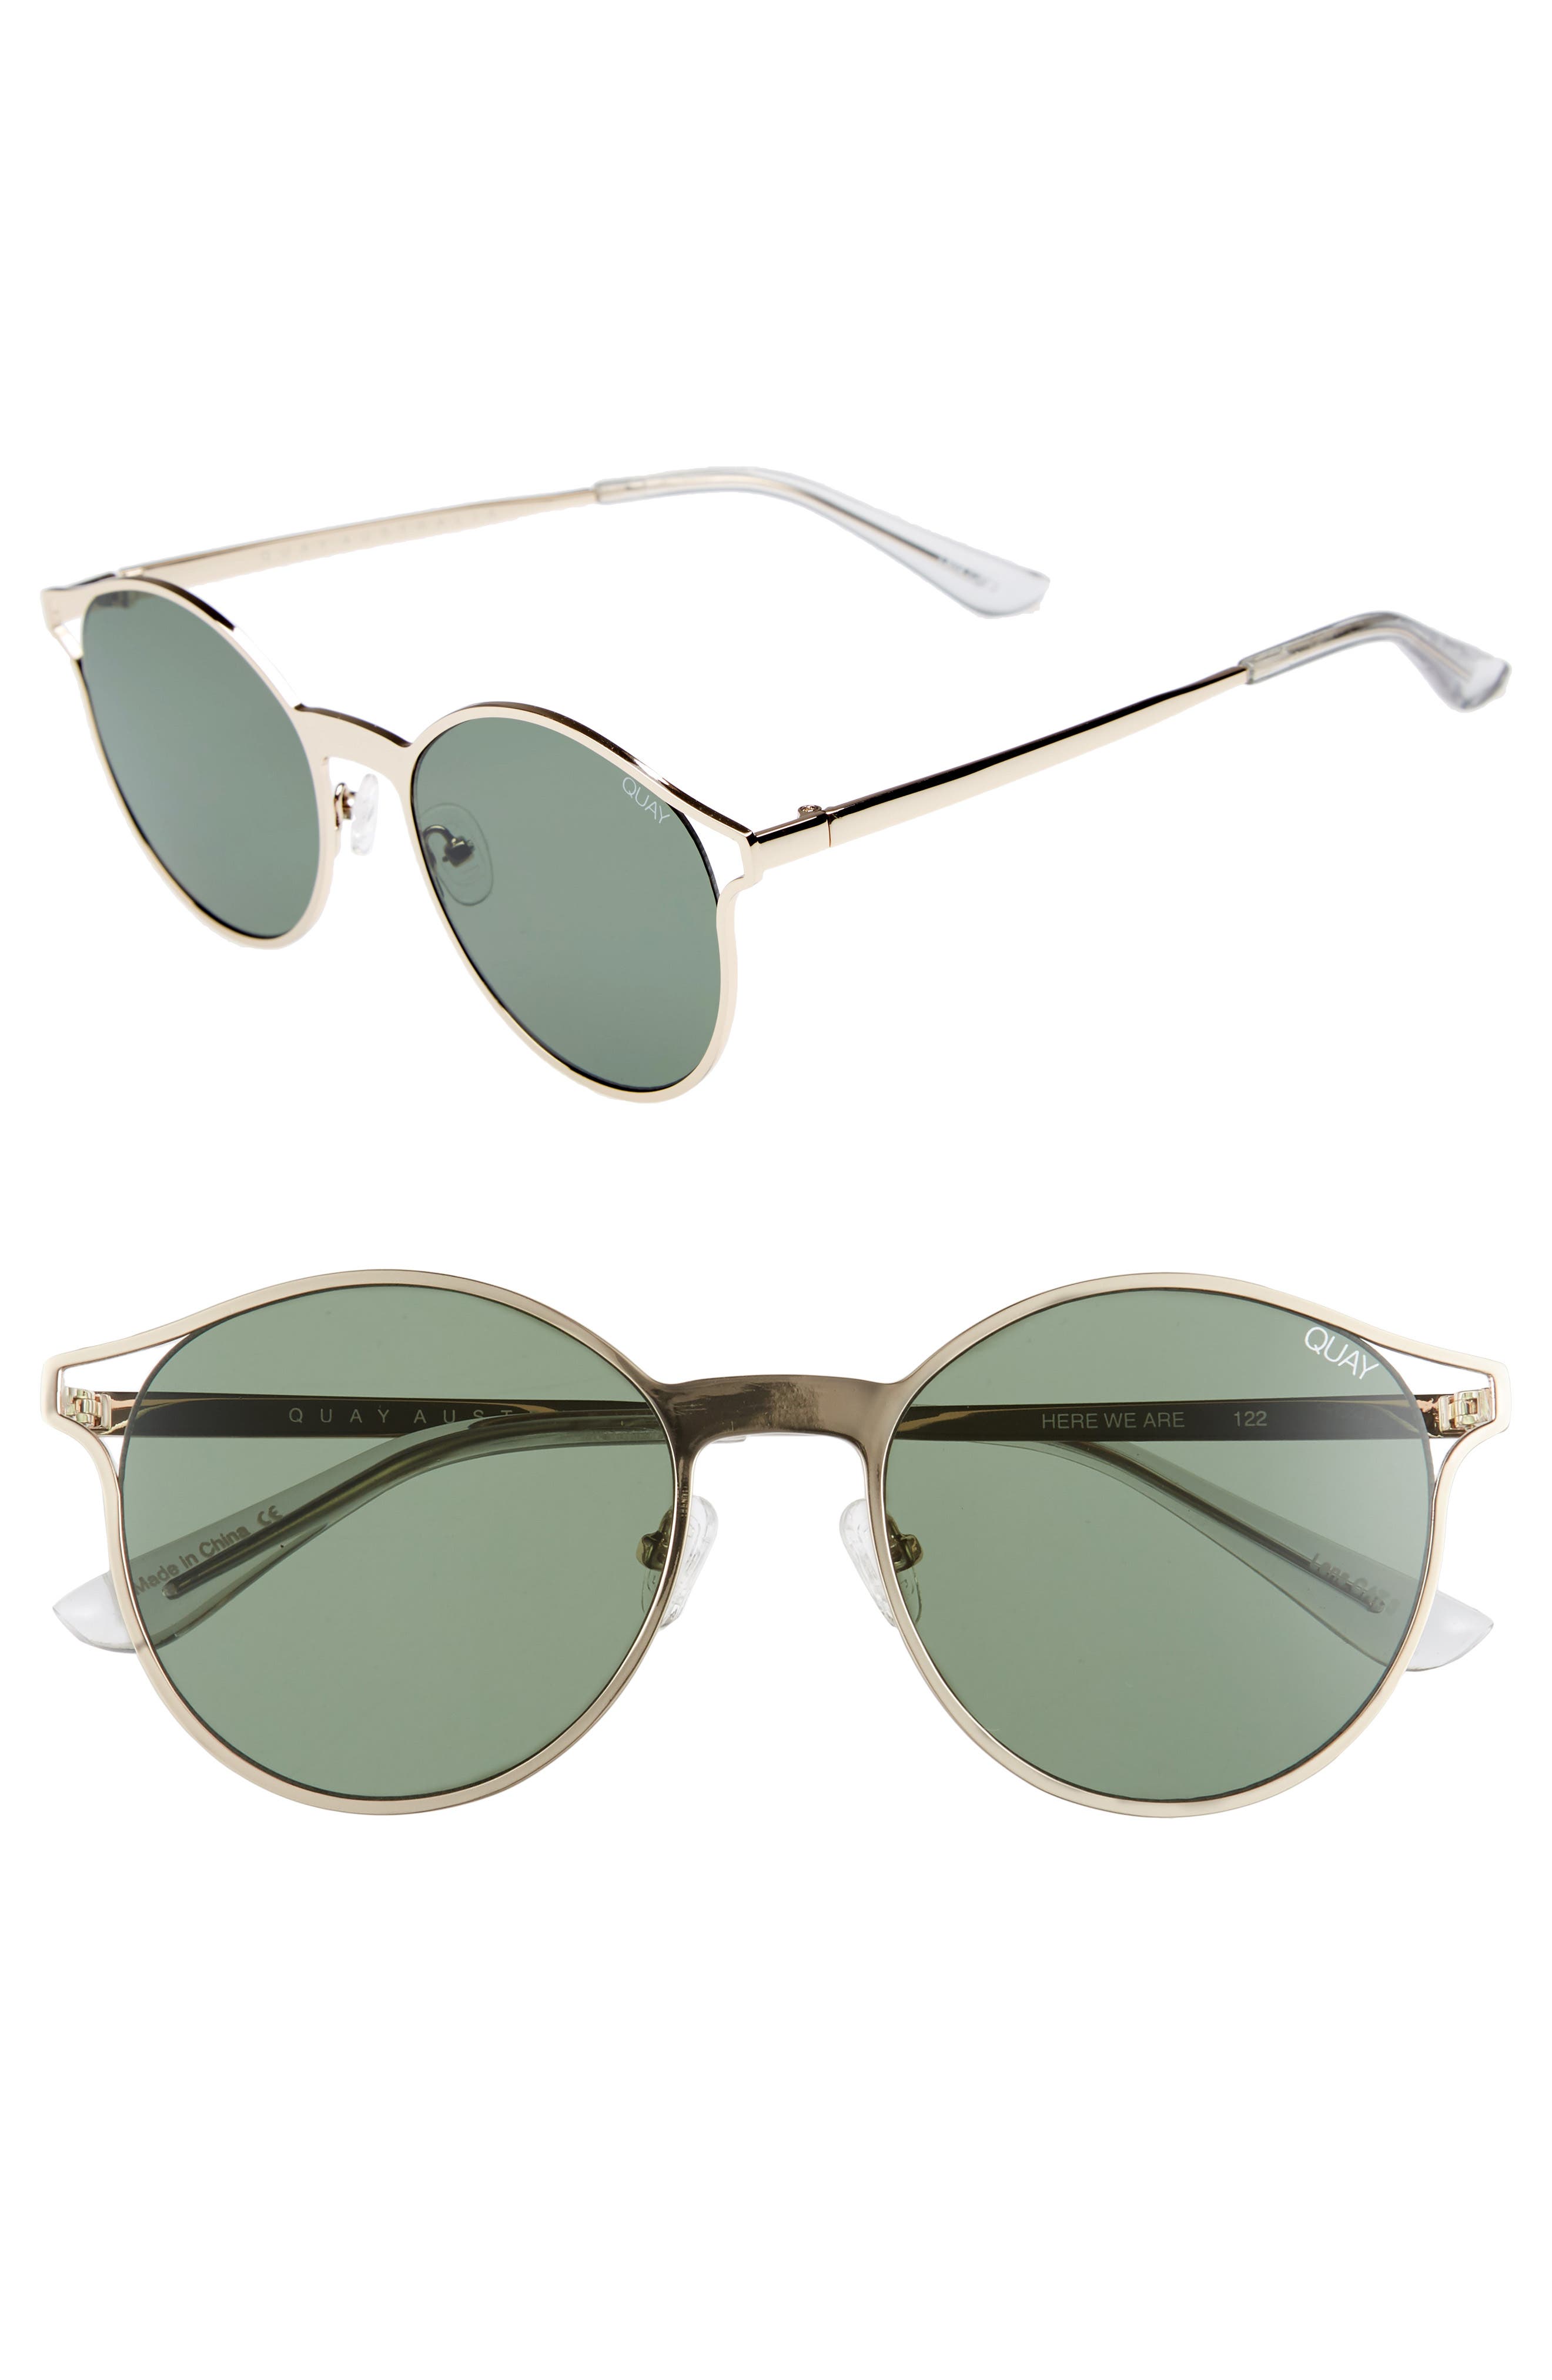 Quay Here We Are 53mm Round Sunglasses In Gold/ Grn